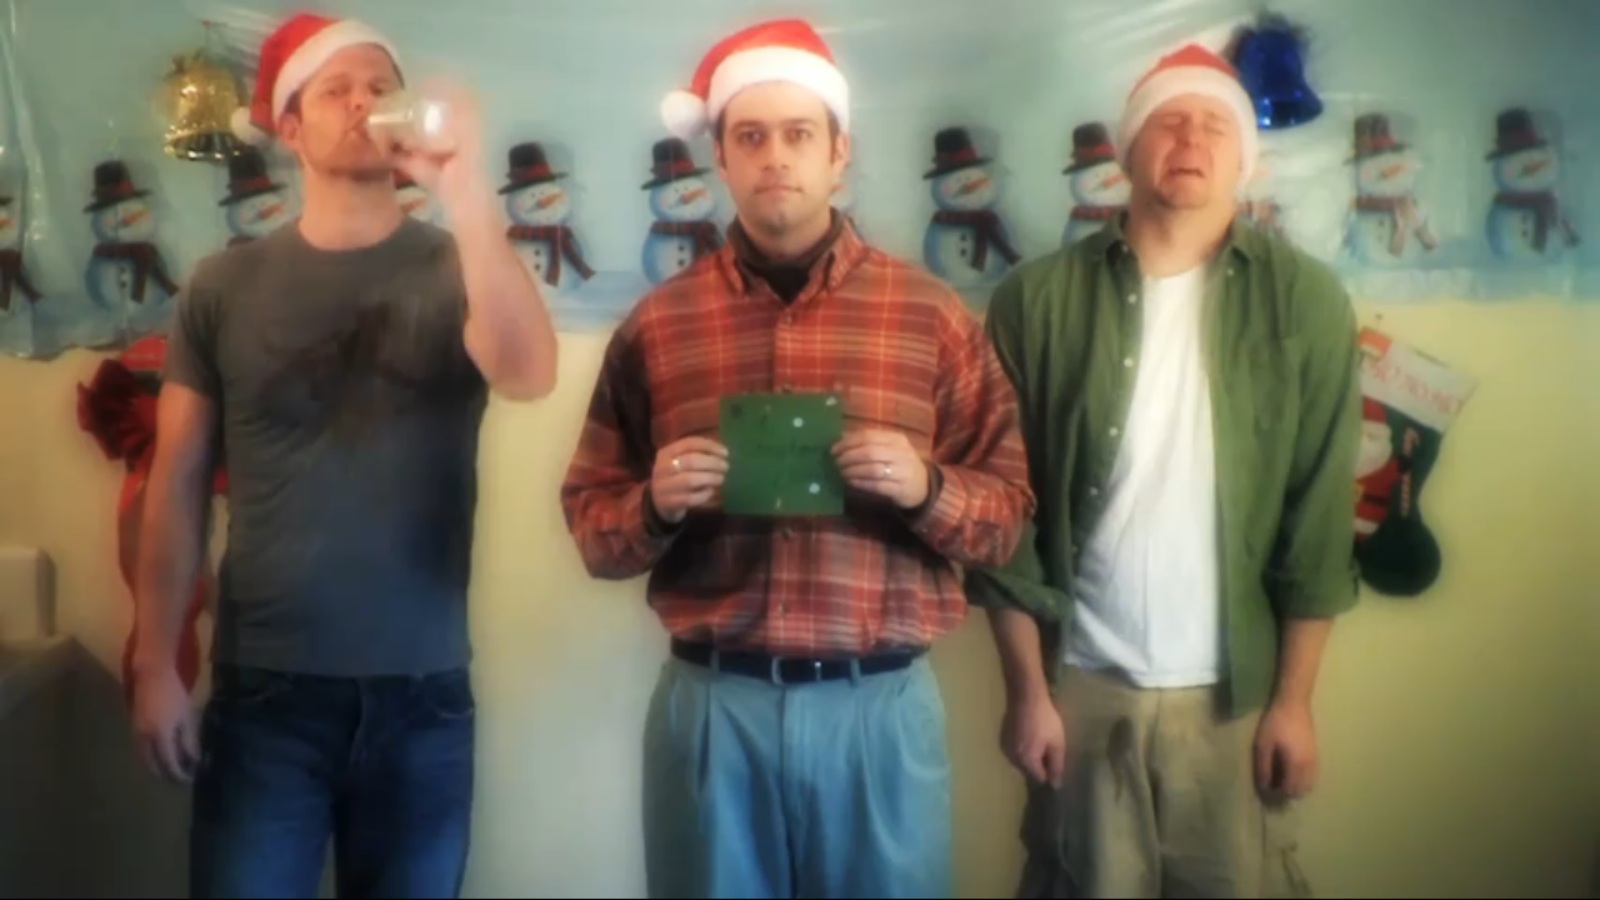 in the GTOtv holiday video, wishing season's greetings to you and yours